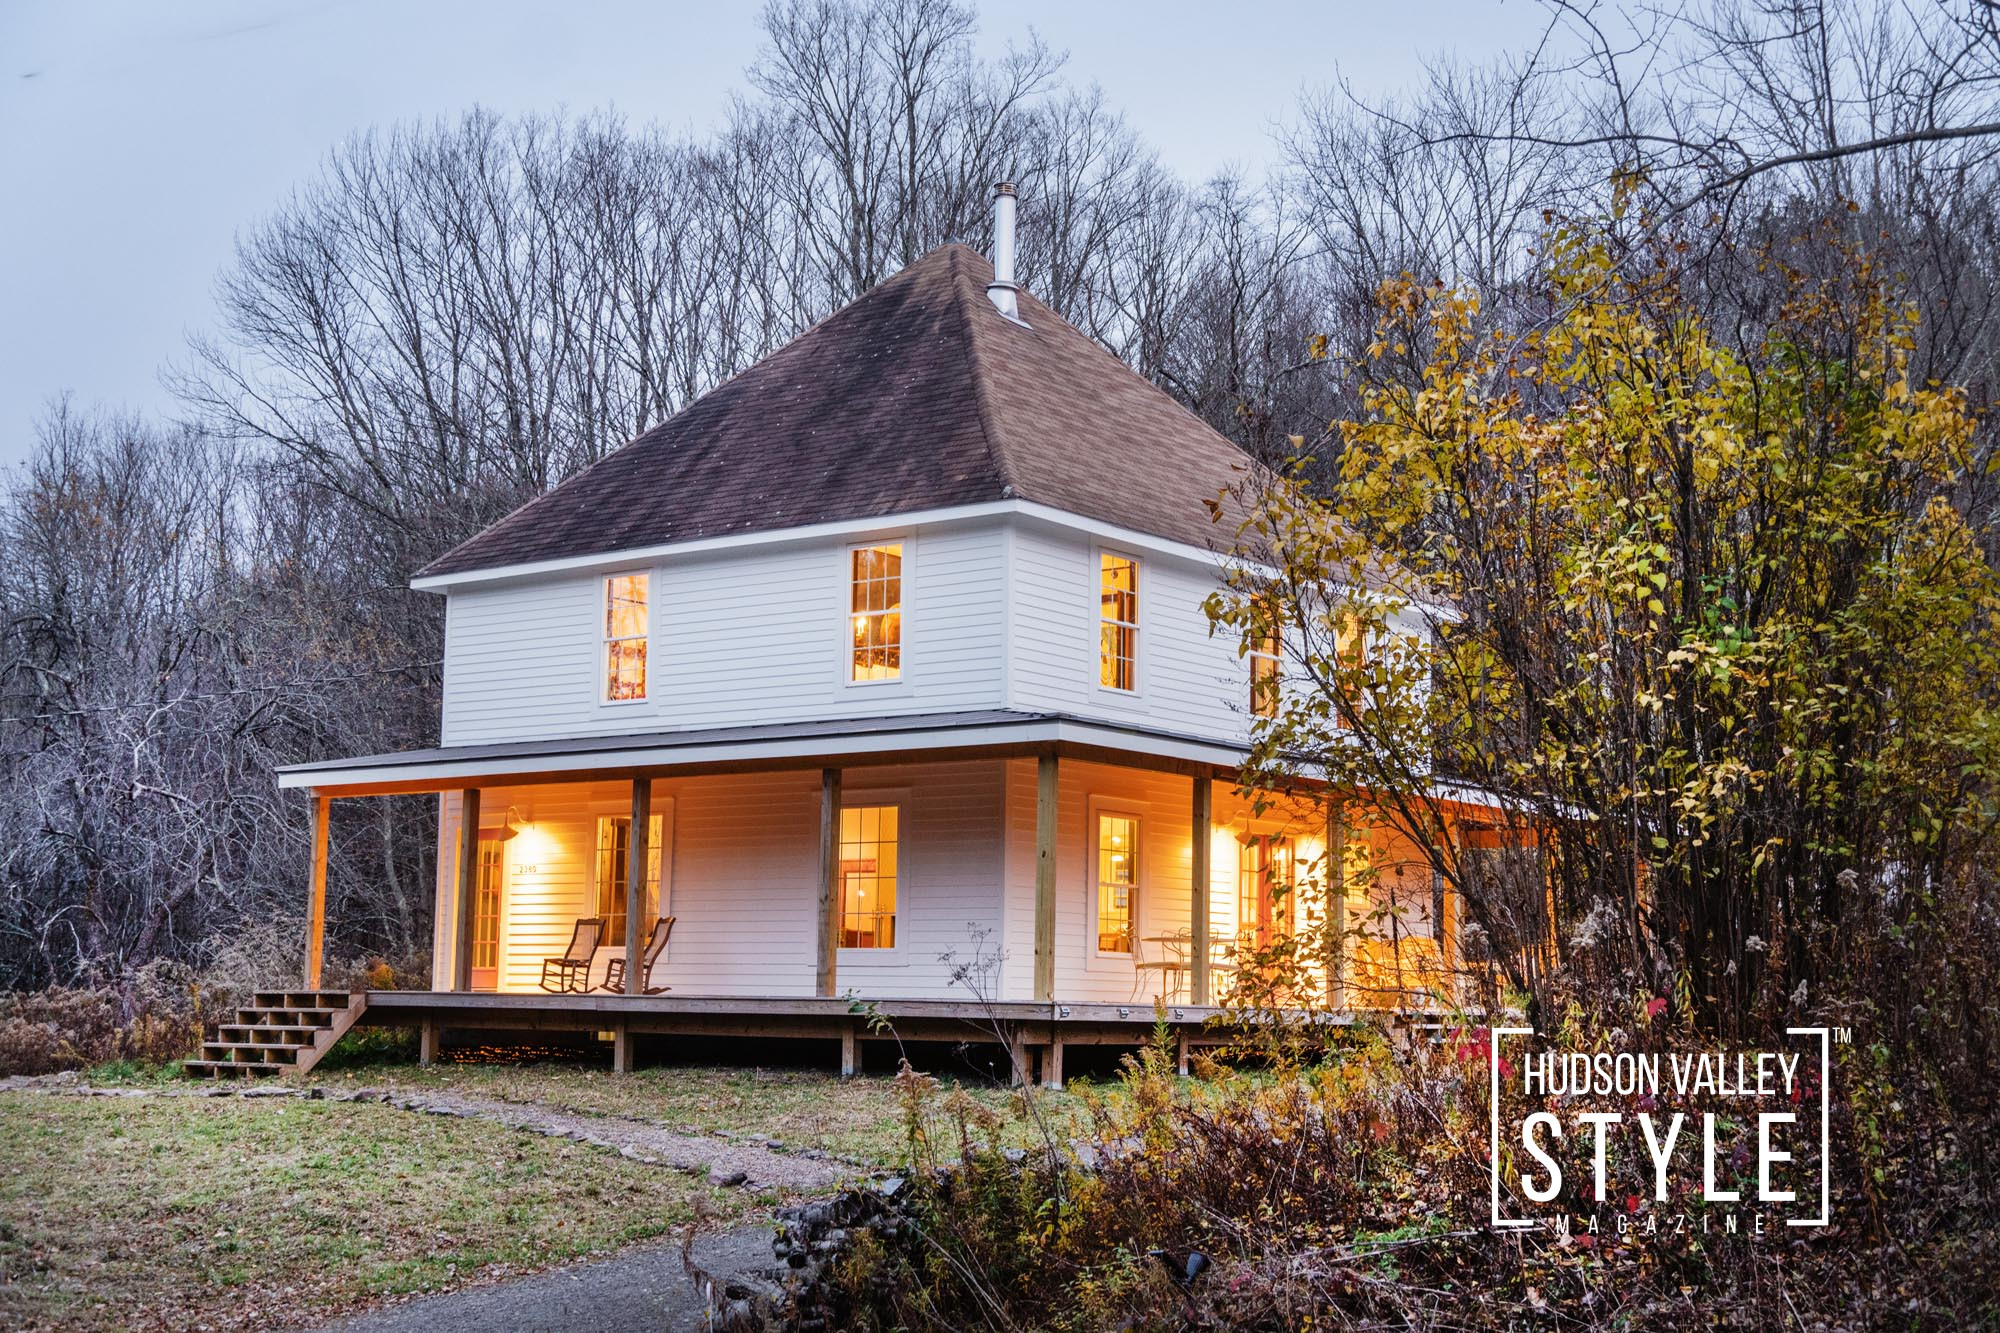 Take a Photo Tour of a Historic Farmhouse in the Catskills with Photographer Maxwell Alexander – Presented by ALLUVION MEDIA – The Best Airbnb and Travel Lifestyle Photography in New York's Hudson Valley, Catskills, and the Hamptons